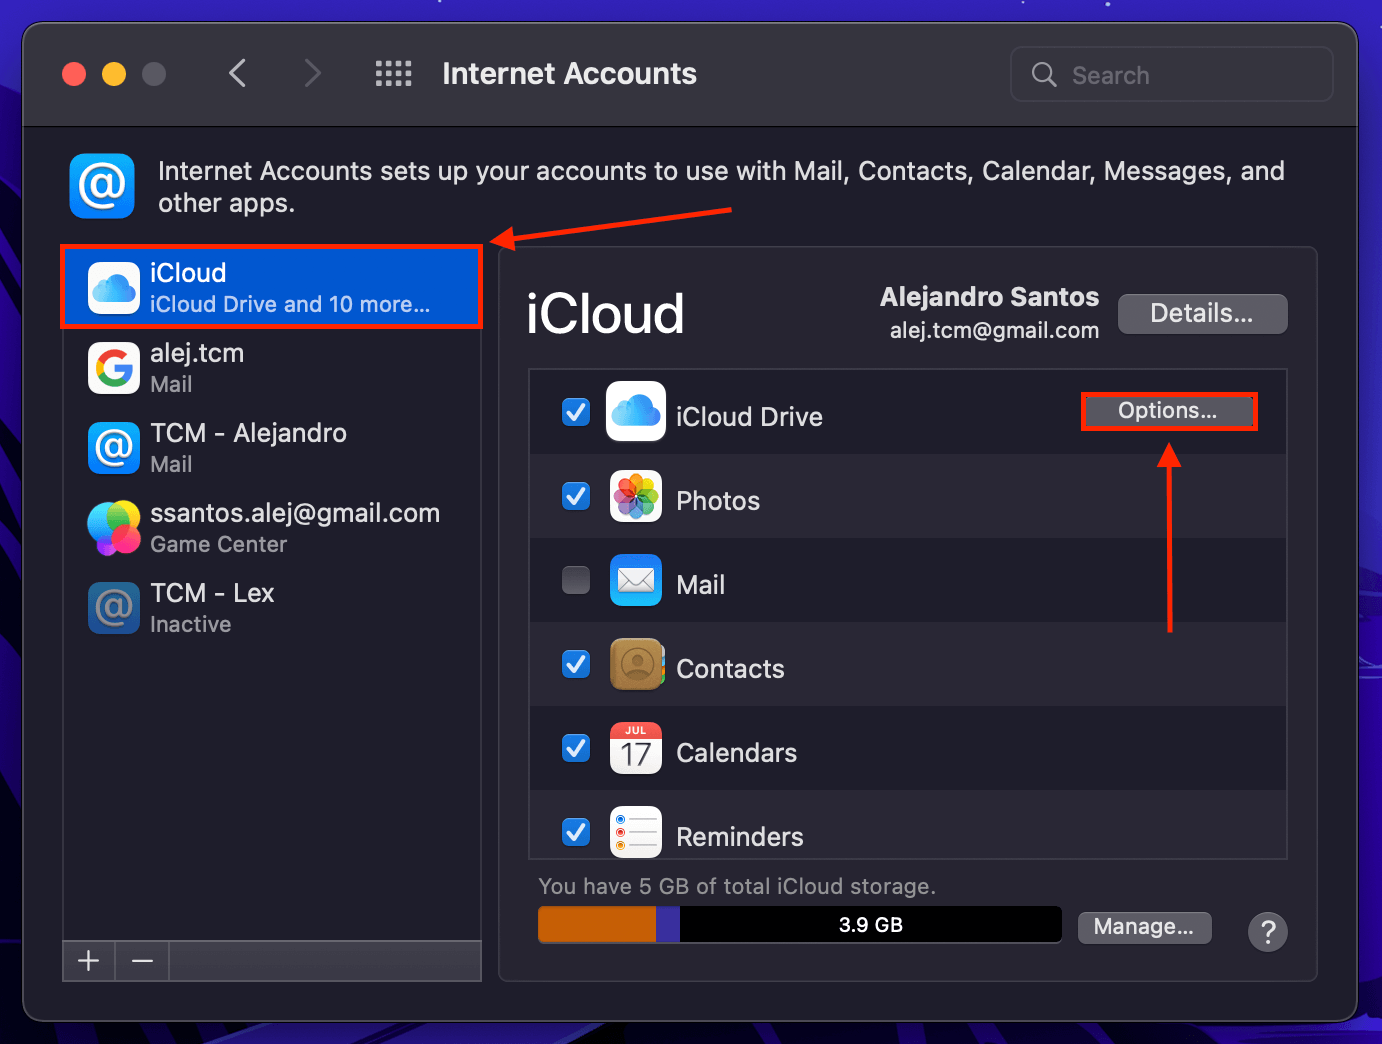 iCloud Drive Options button in the Internet Accounts window